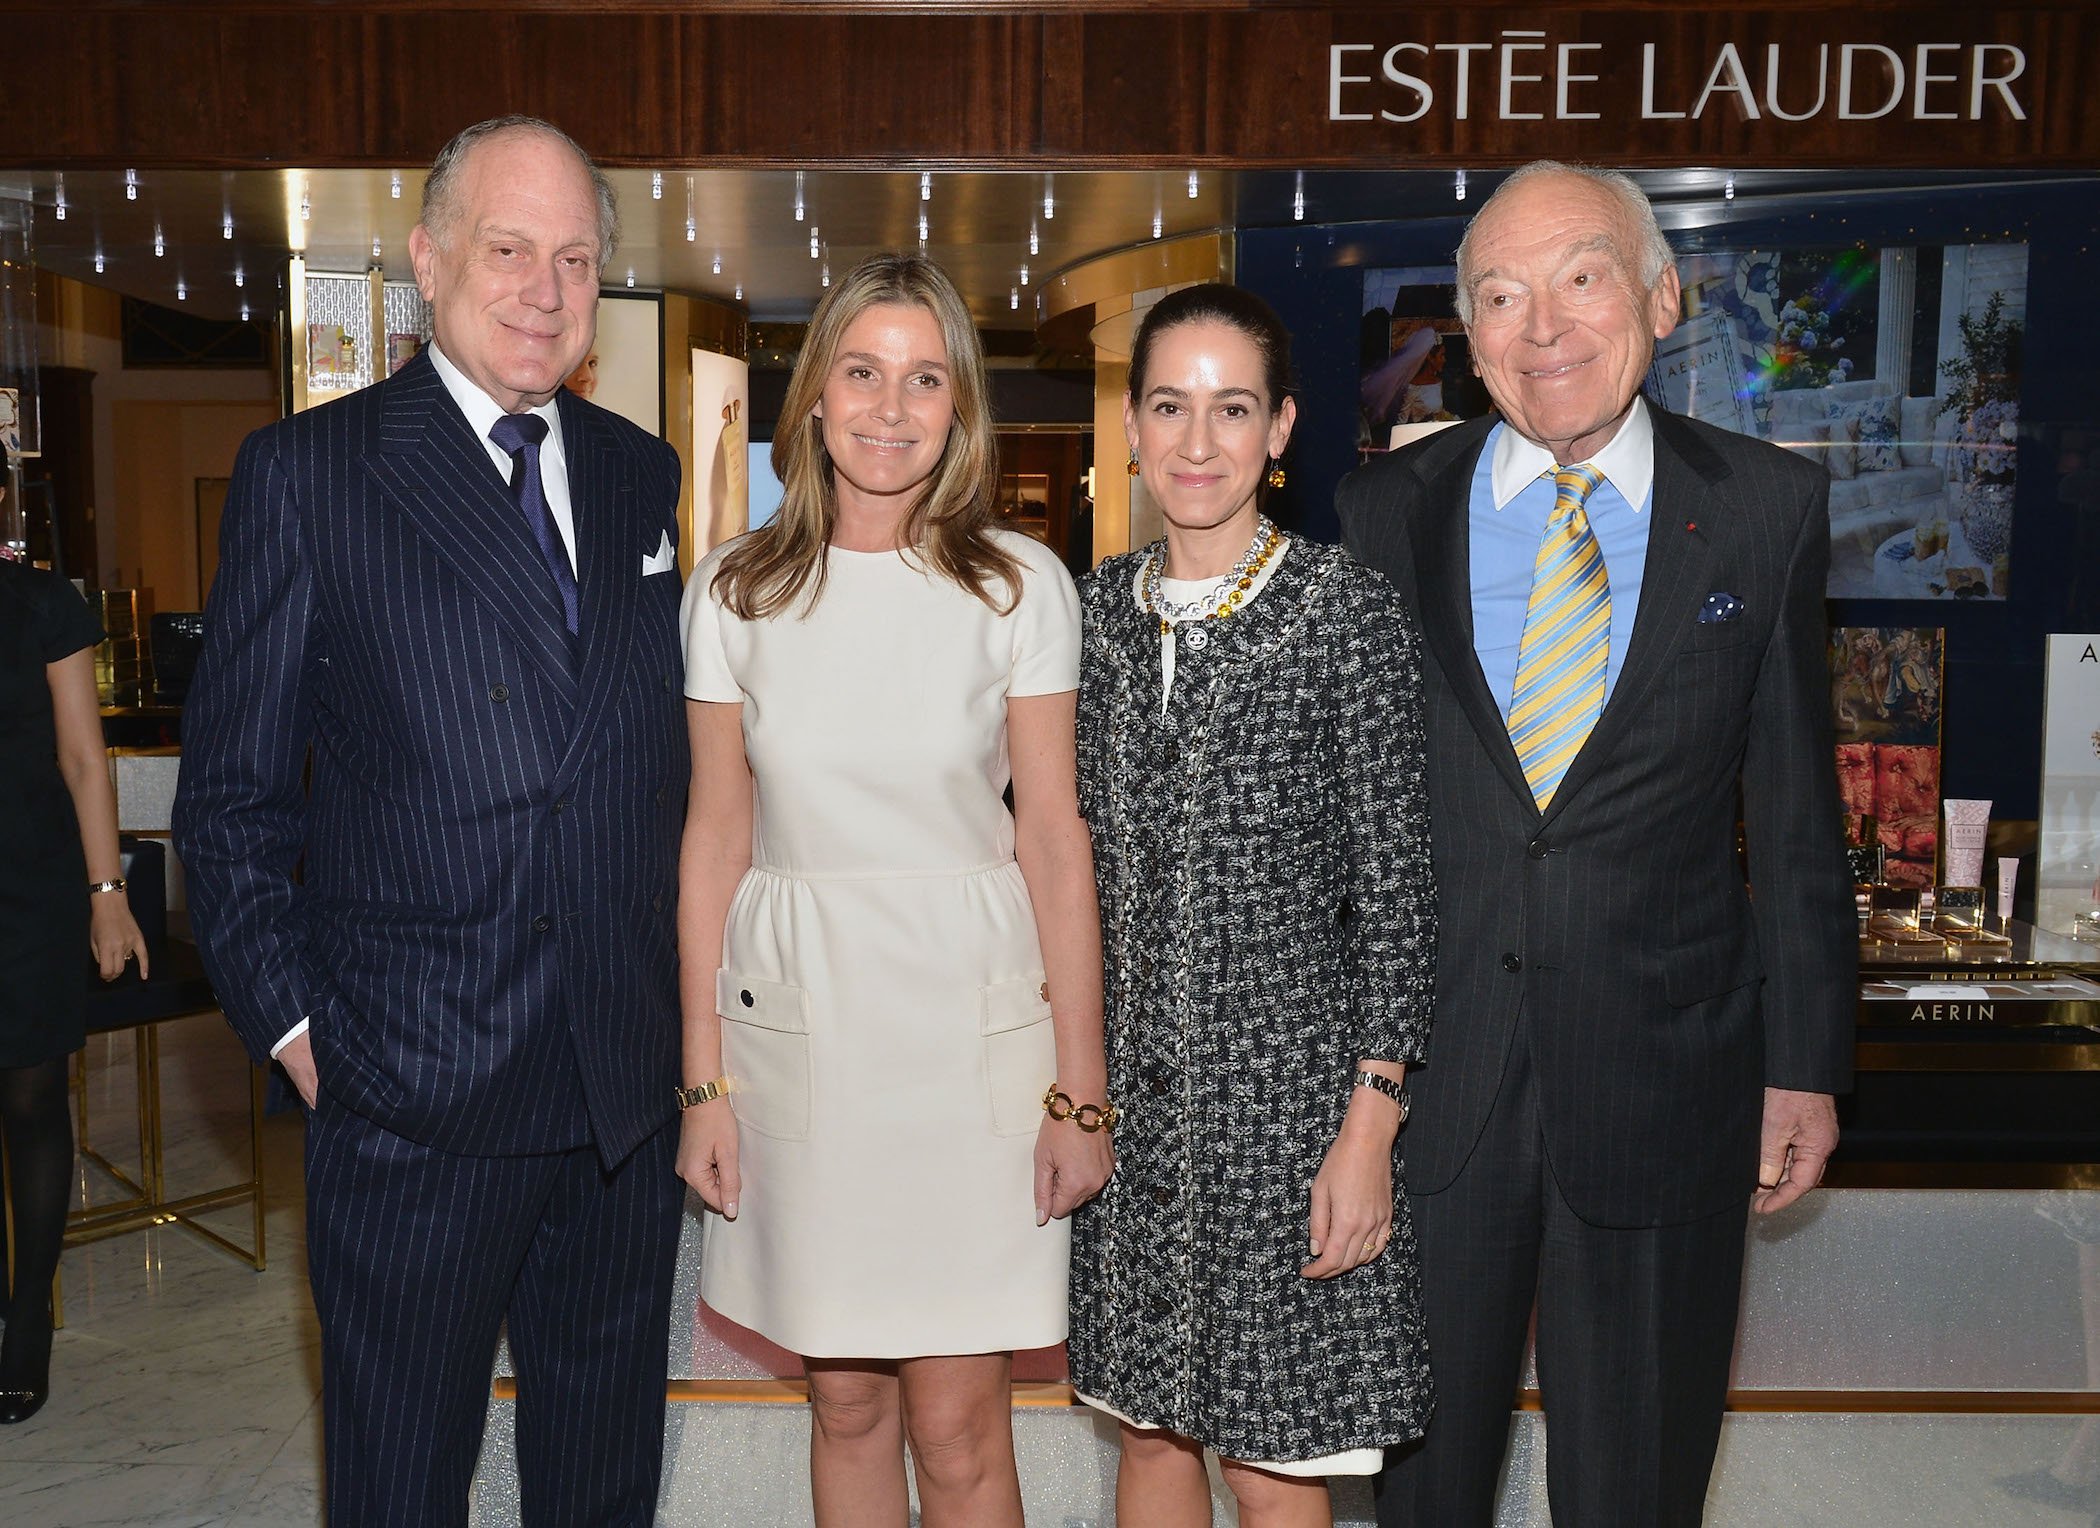 How The Lauder Family Became One Of The Wealthiest Families On The Planet  With A Combined Net Worth Of $24.3 Billion